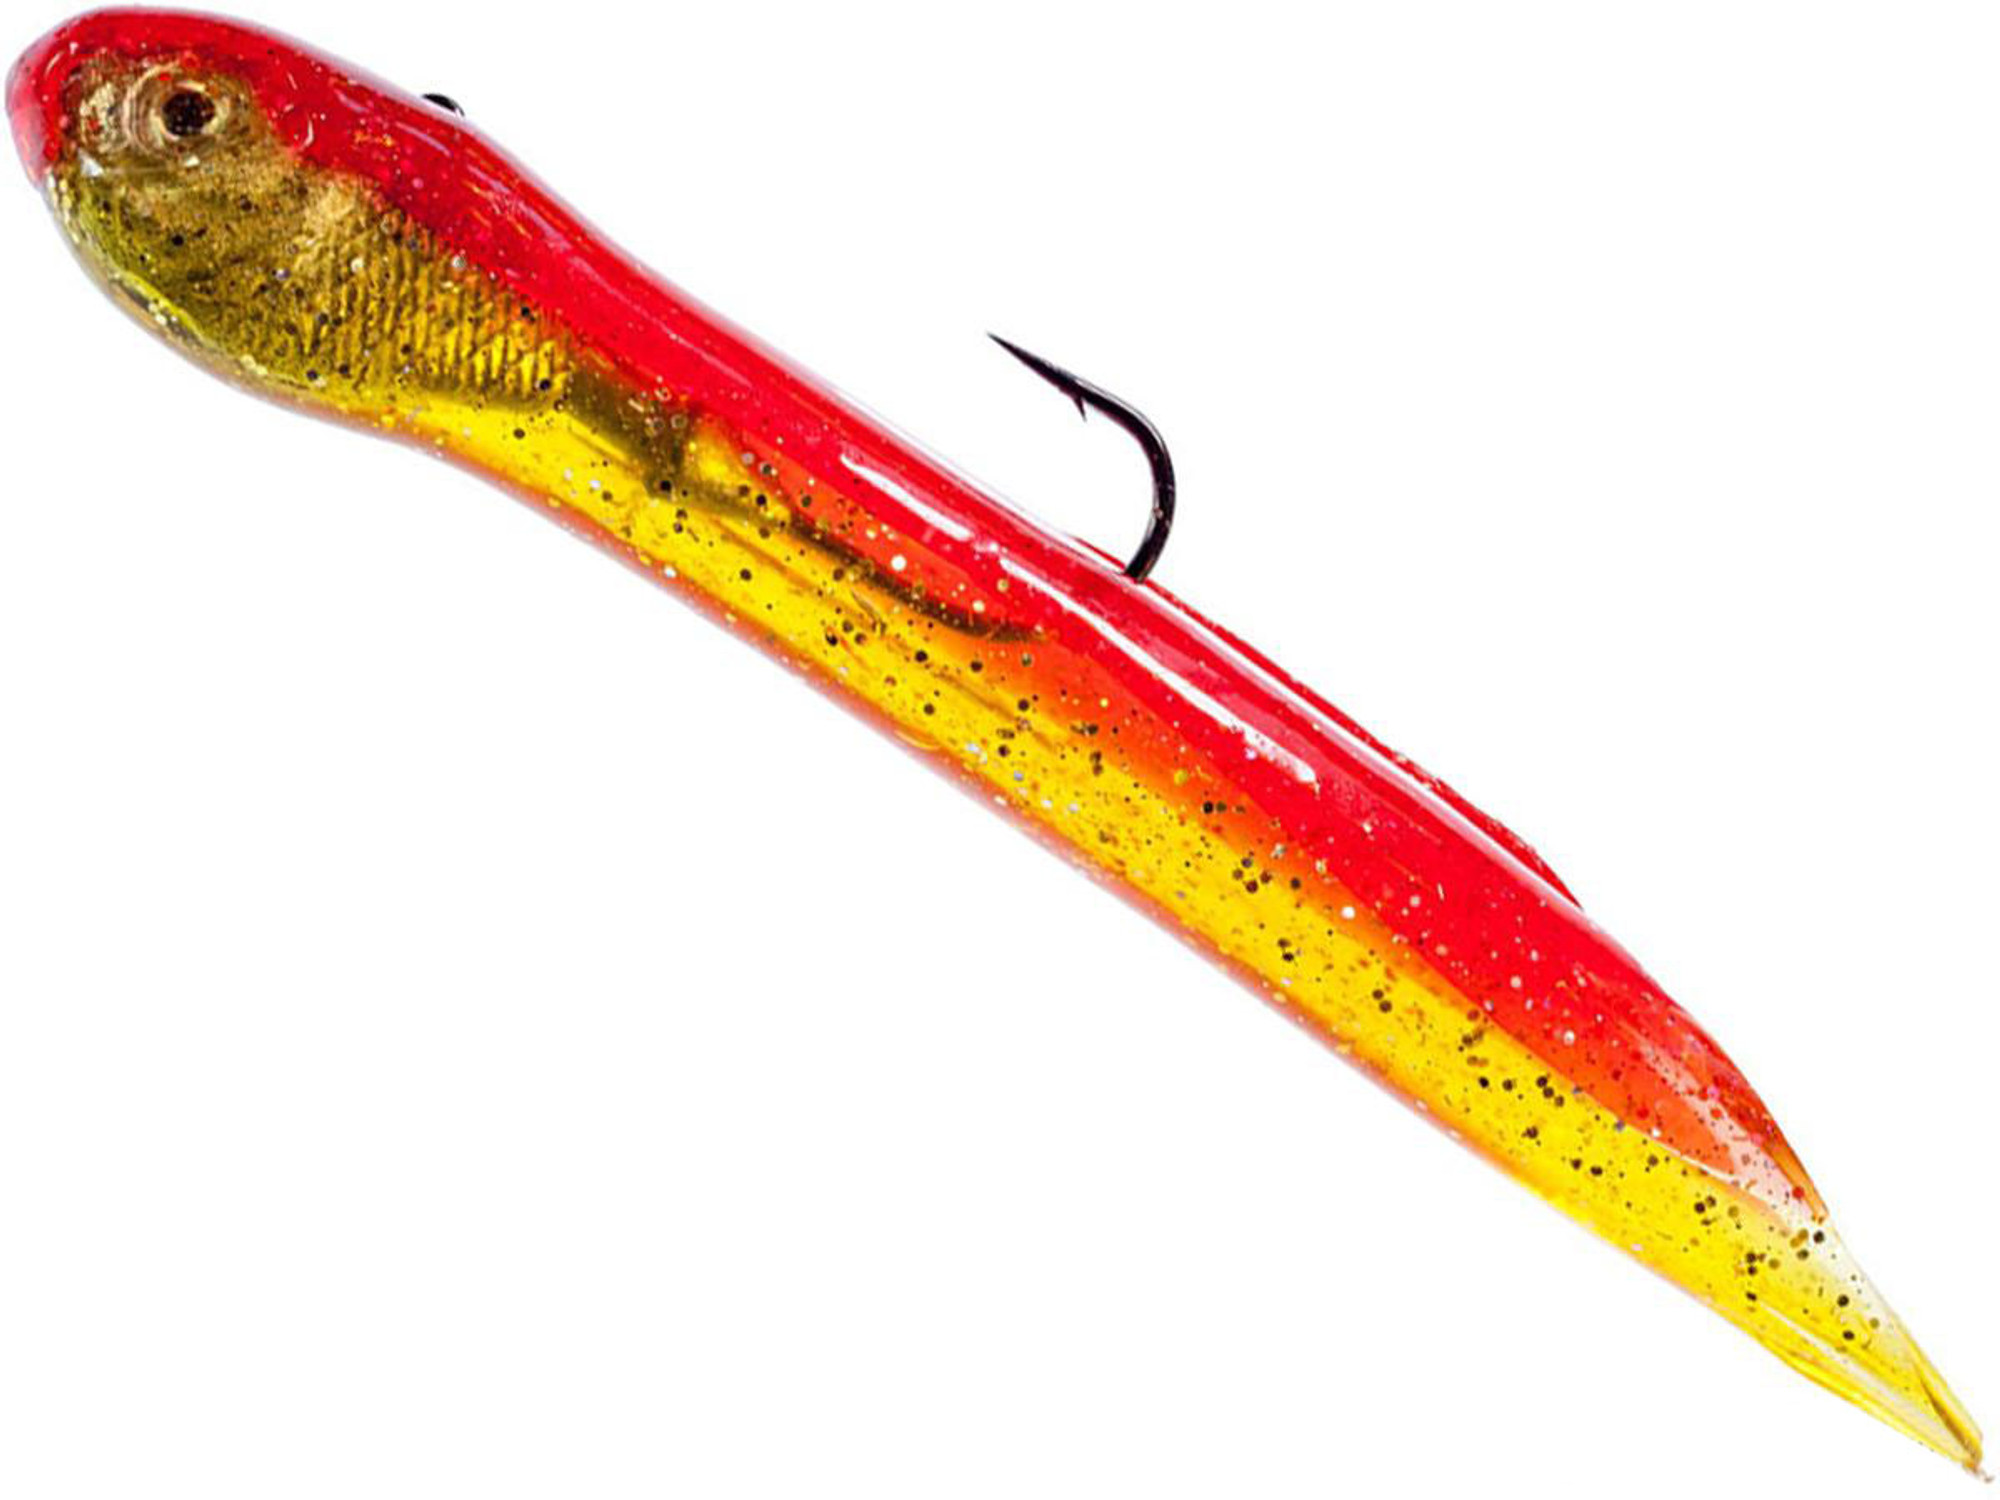 Hook Up Baits Handcrafted Soft Fishing Jigs (Color: Red Crab / 8" / 3 oz)